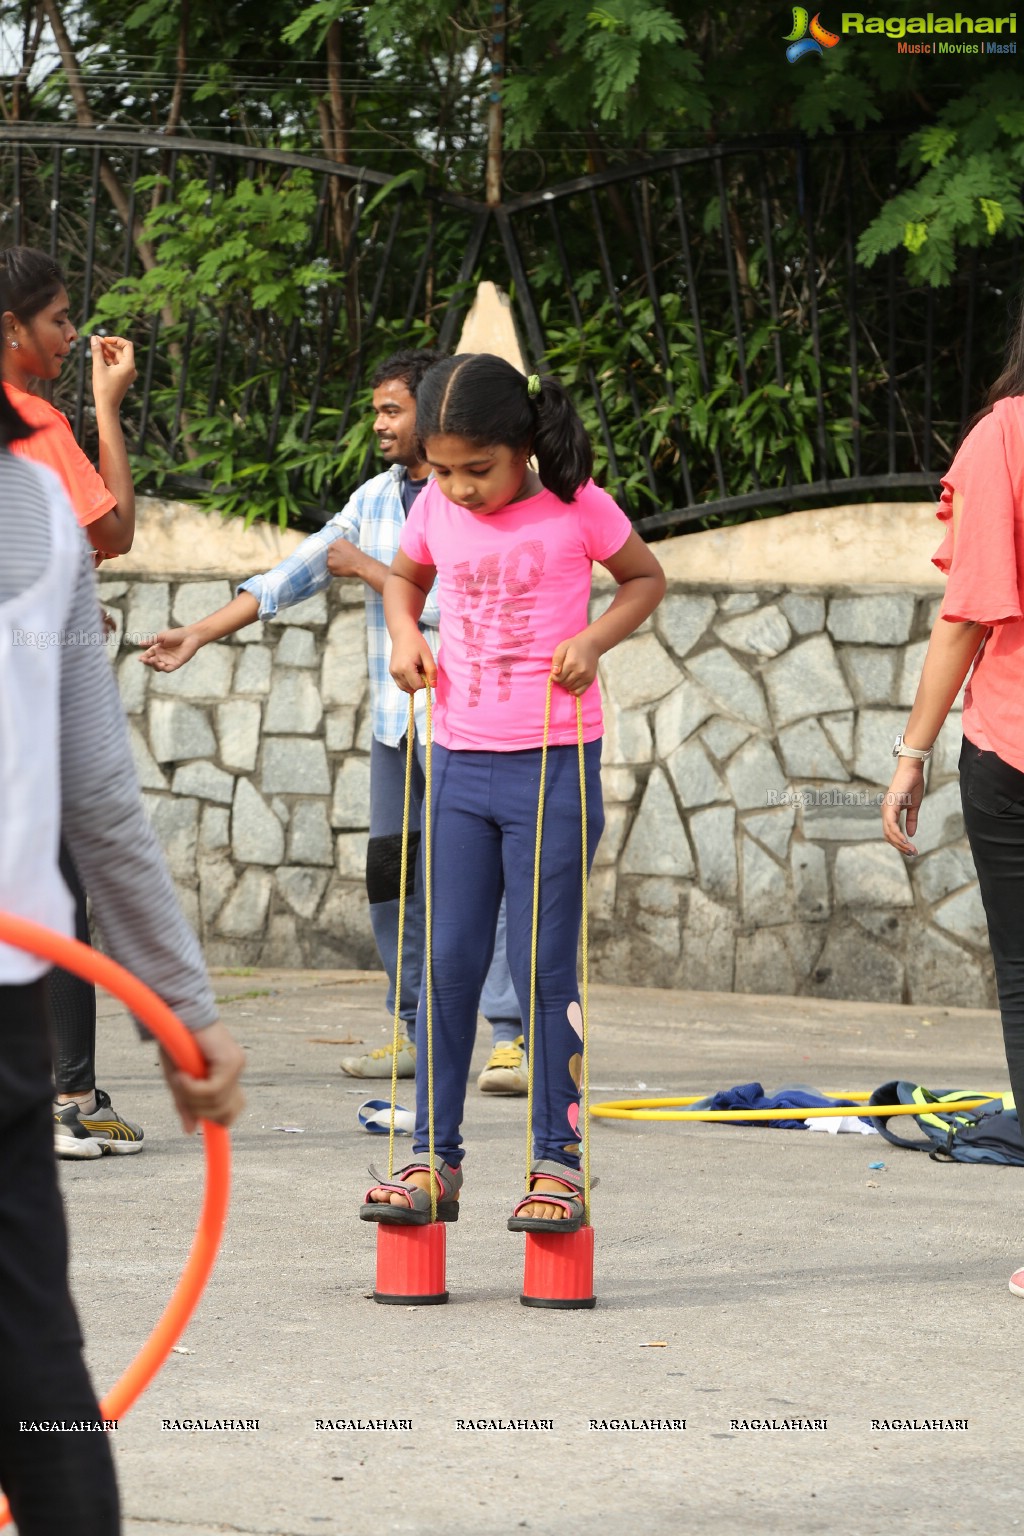 Week 23 - Physical Literacy Days by Pullela Gopichand Badminton Academy